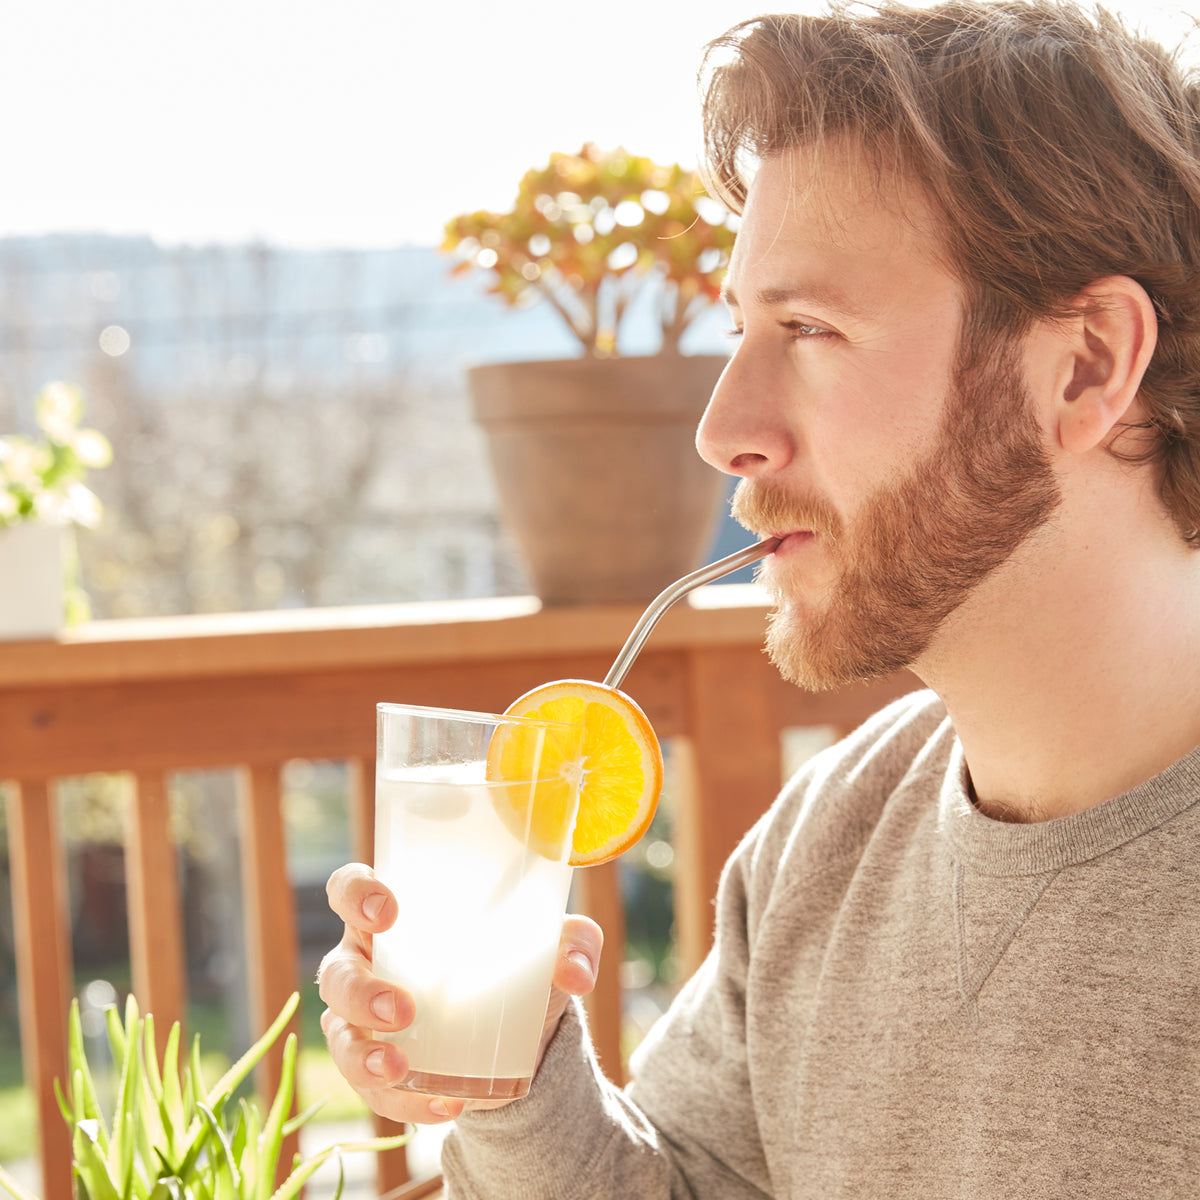 Lifestyle photo, man enjoys a summertime lemonade from a tall glass tumbler with a fresh orange slice using a brandless stainless steel straw.